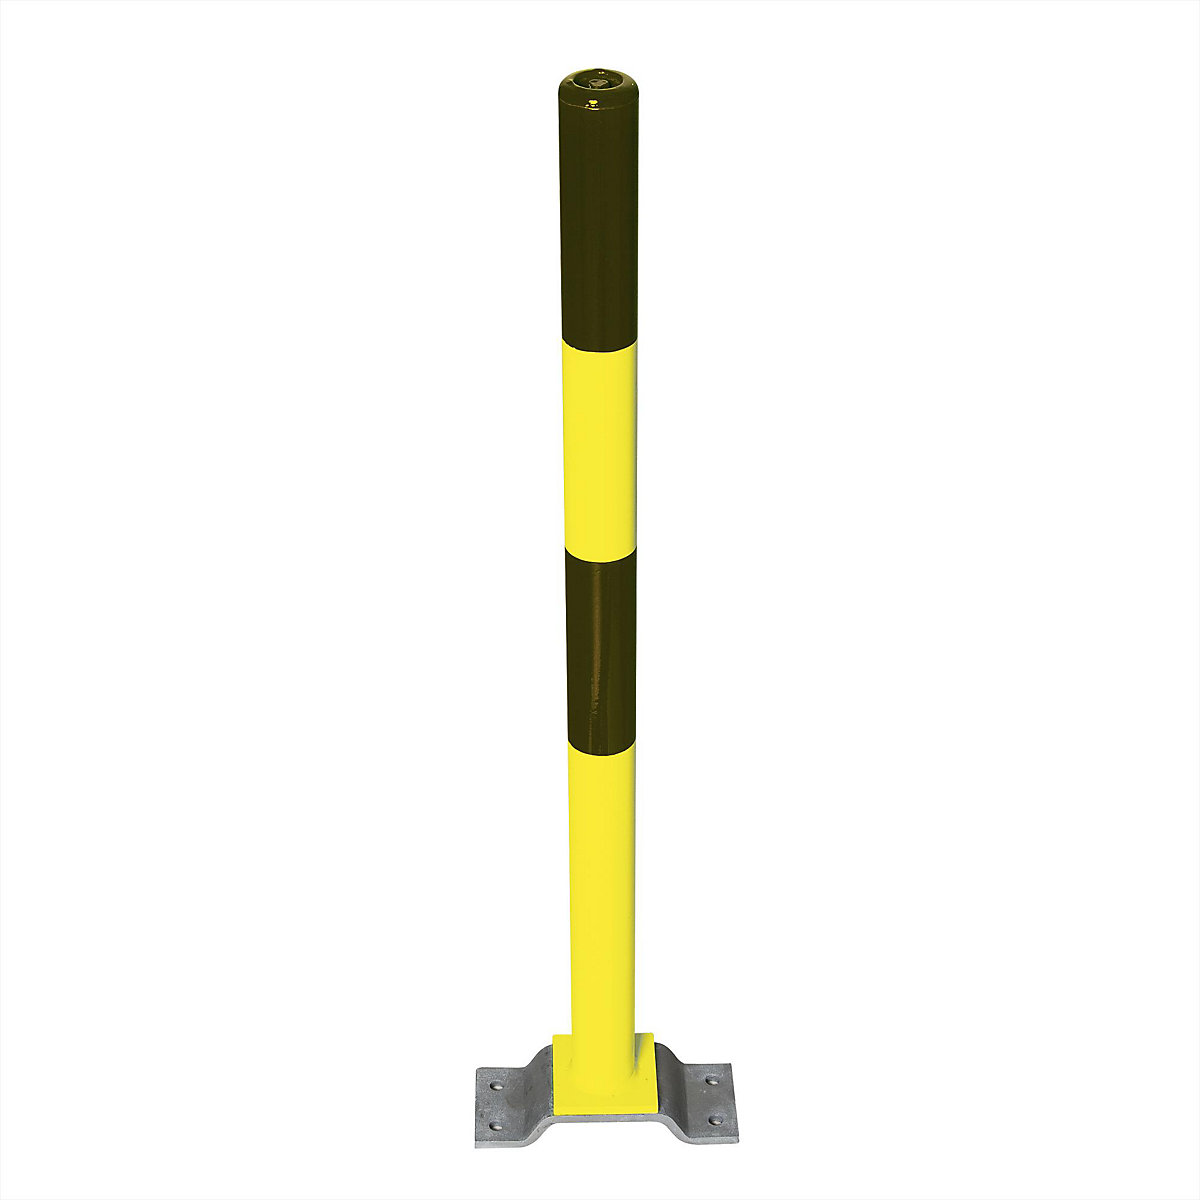 Barrier post made of steel, for bolting in place, Ø 76 mm, black/yellow, 1 chain eyelet-6